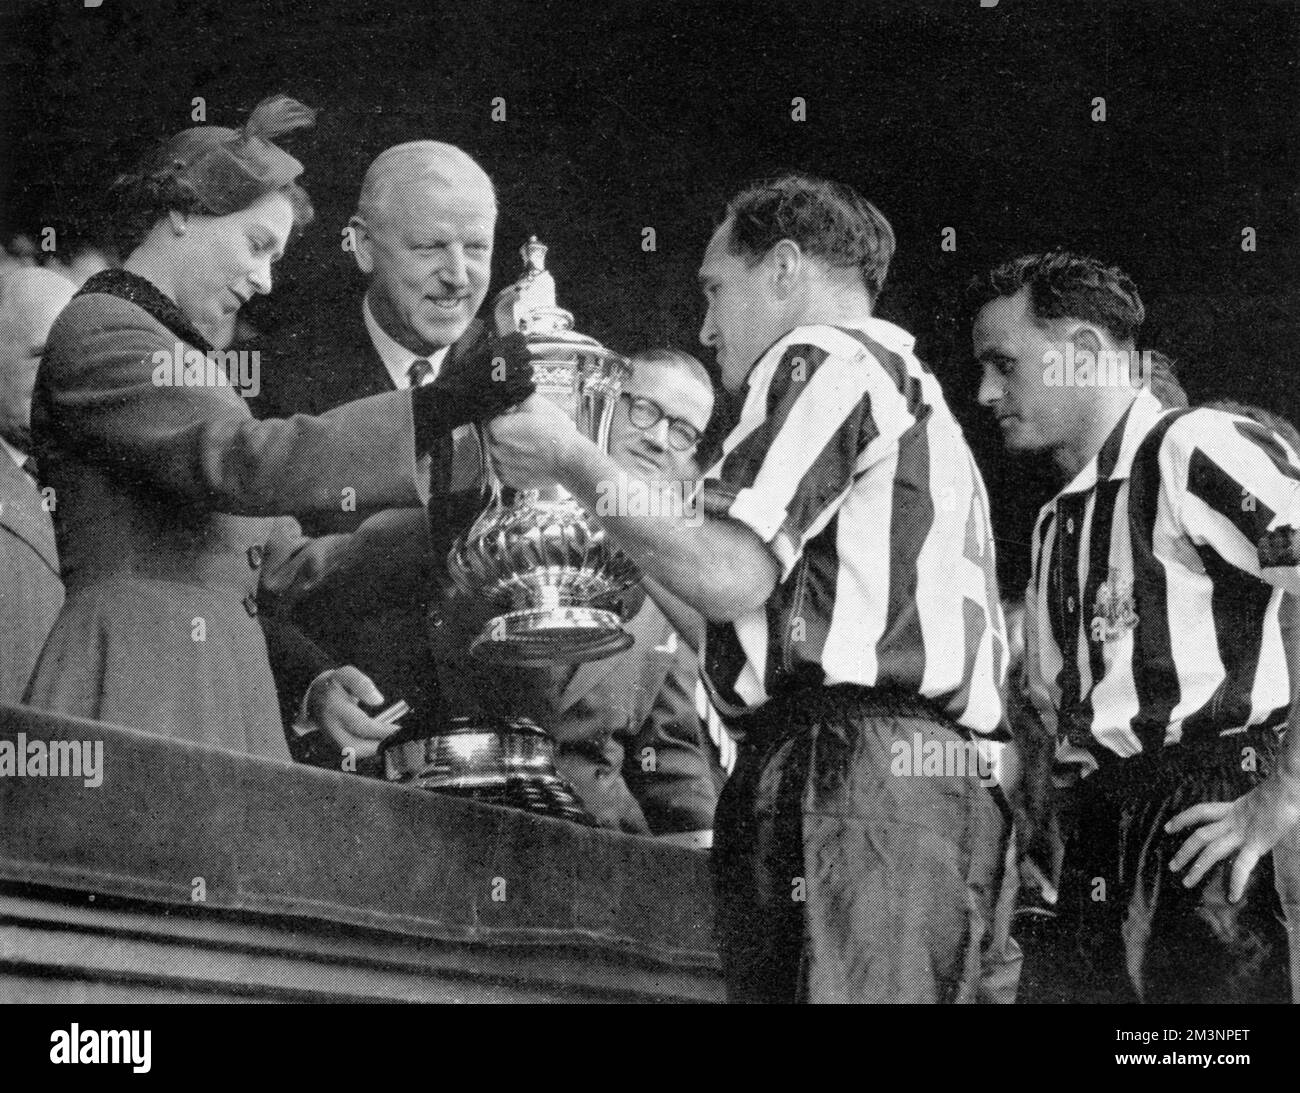 The Queen hands the F.A. Cup to the Newcastle captain, Jimmy Scoular, watched by the Secretary of the Football Association, Sir Stanley Rous. B. Cowell, the Newcastle right back, is standing on the right. Newcastle beat Manchester City 3-1 in the final.      Date: 1955 Stock Photo